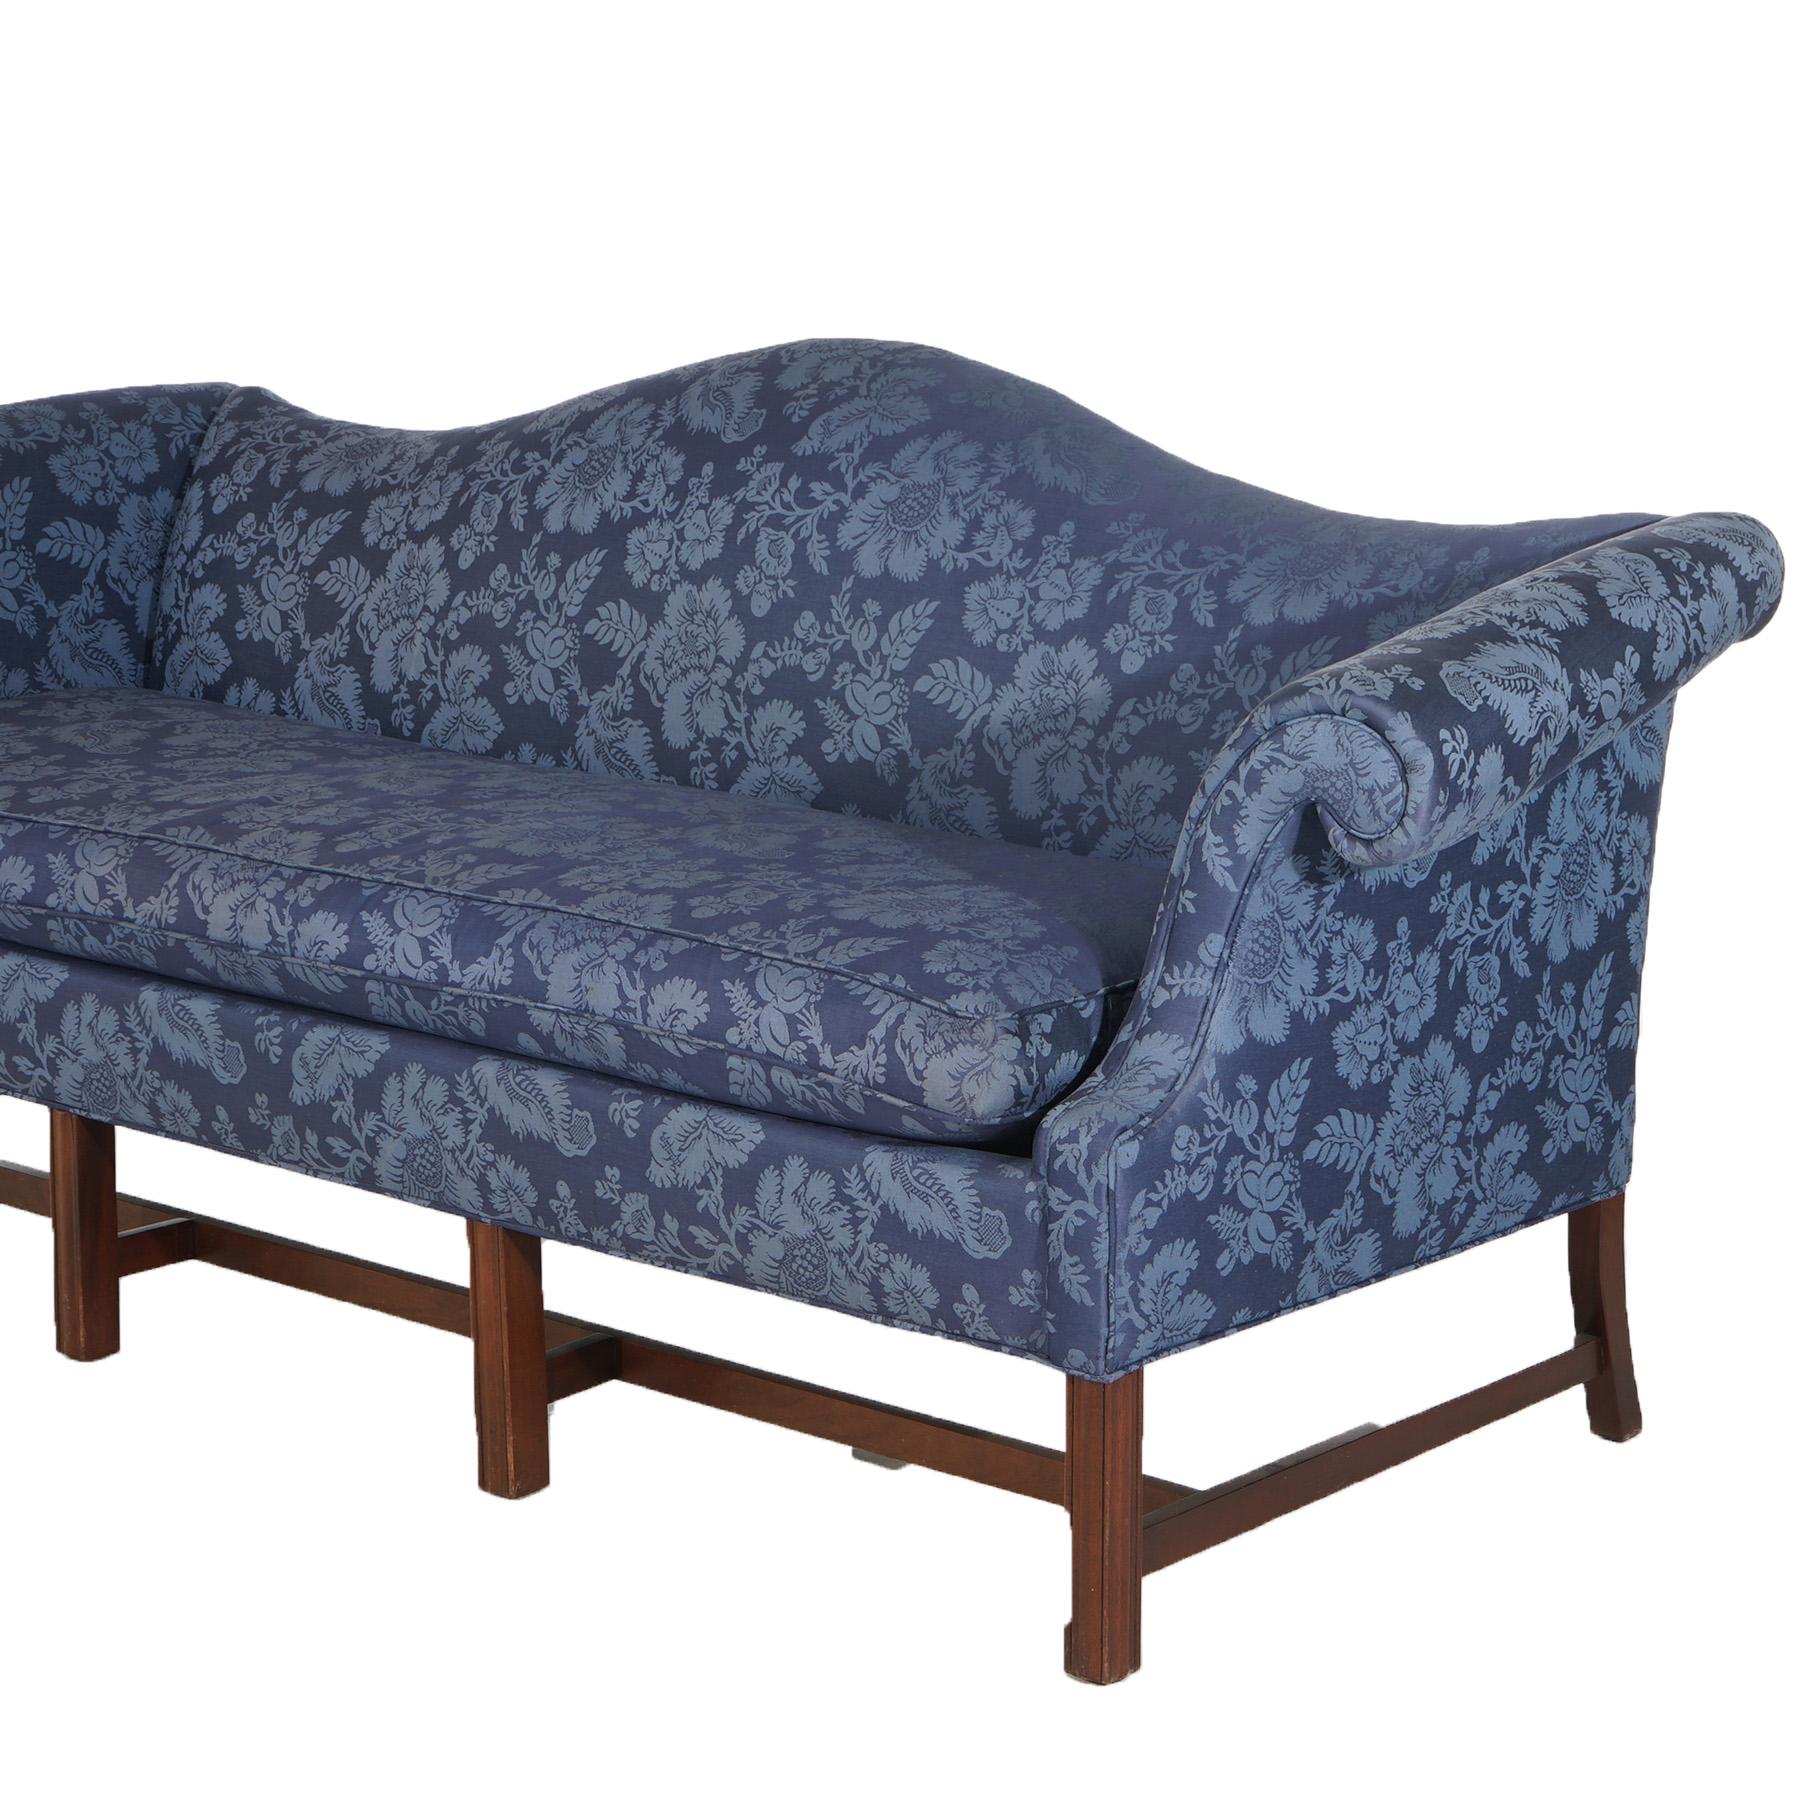 20th Century Antique Chippendale Camelback Sofa with Scroll Arms, Blue, C1930